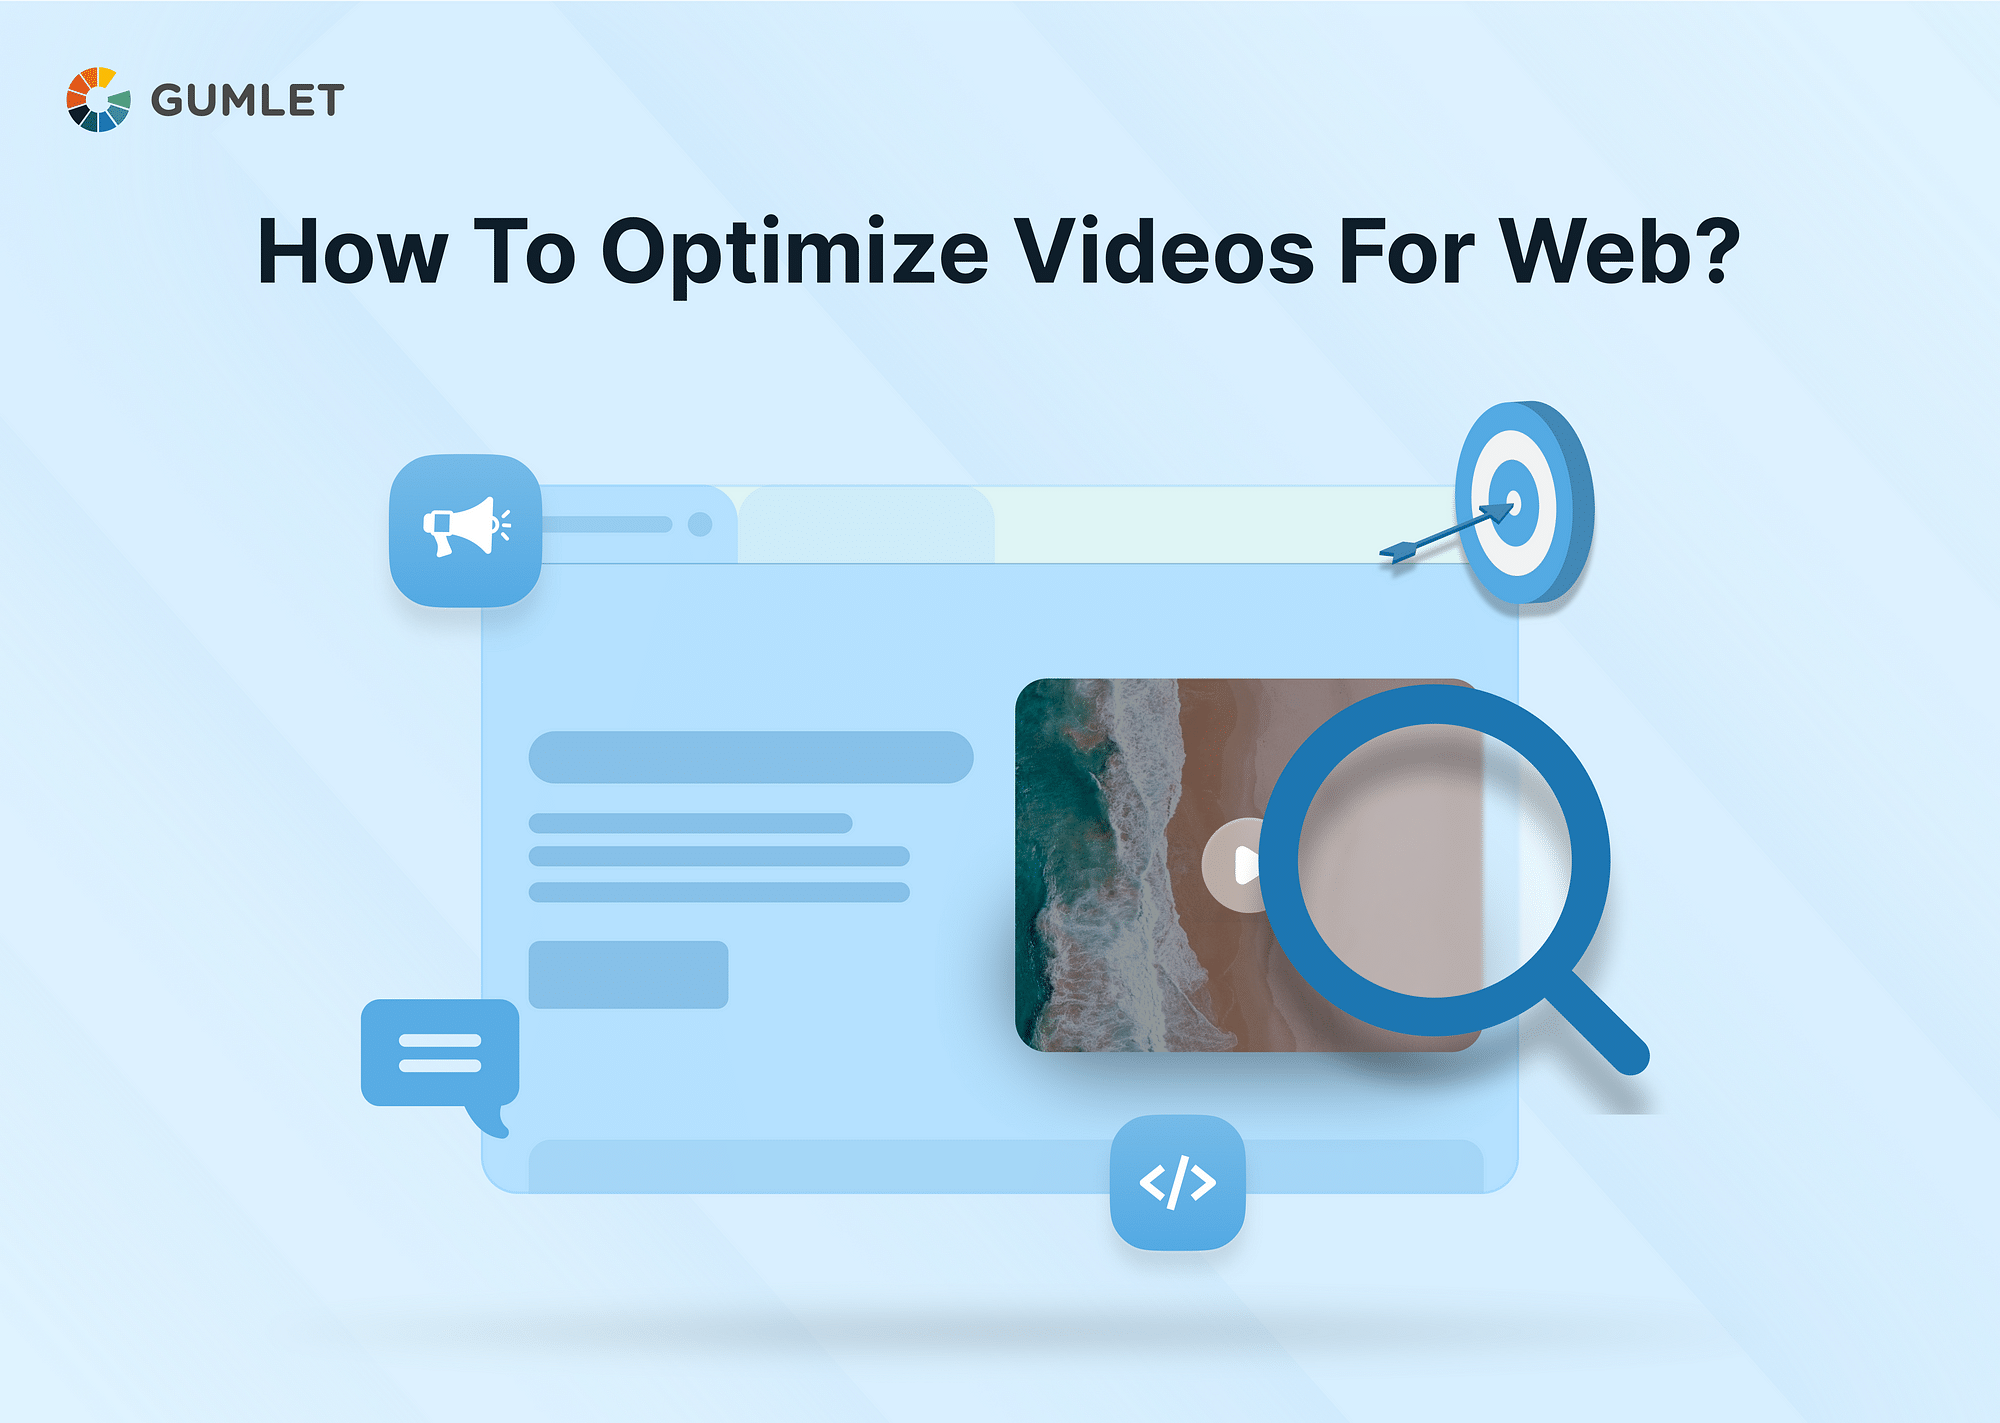 How to Optimize Videos for the Web?